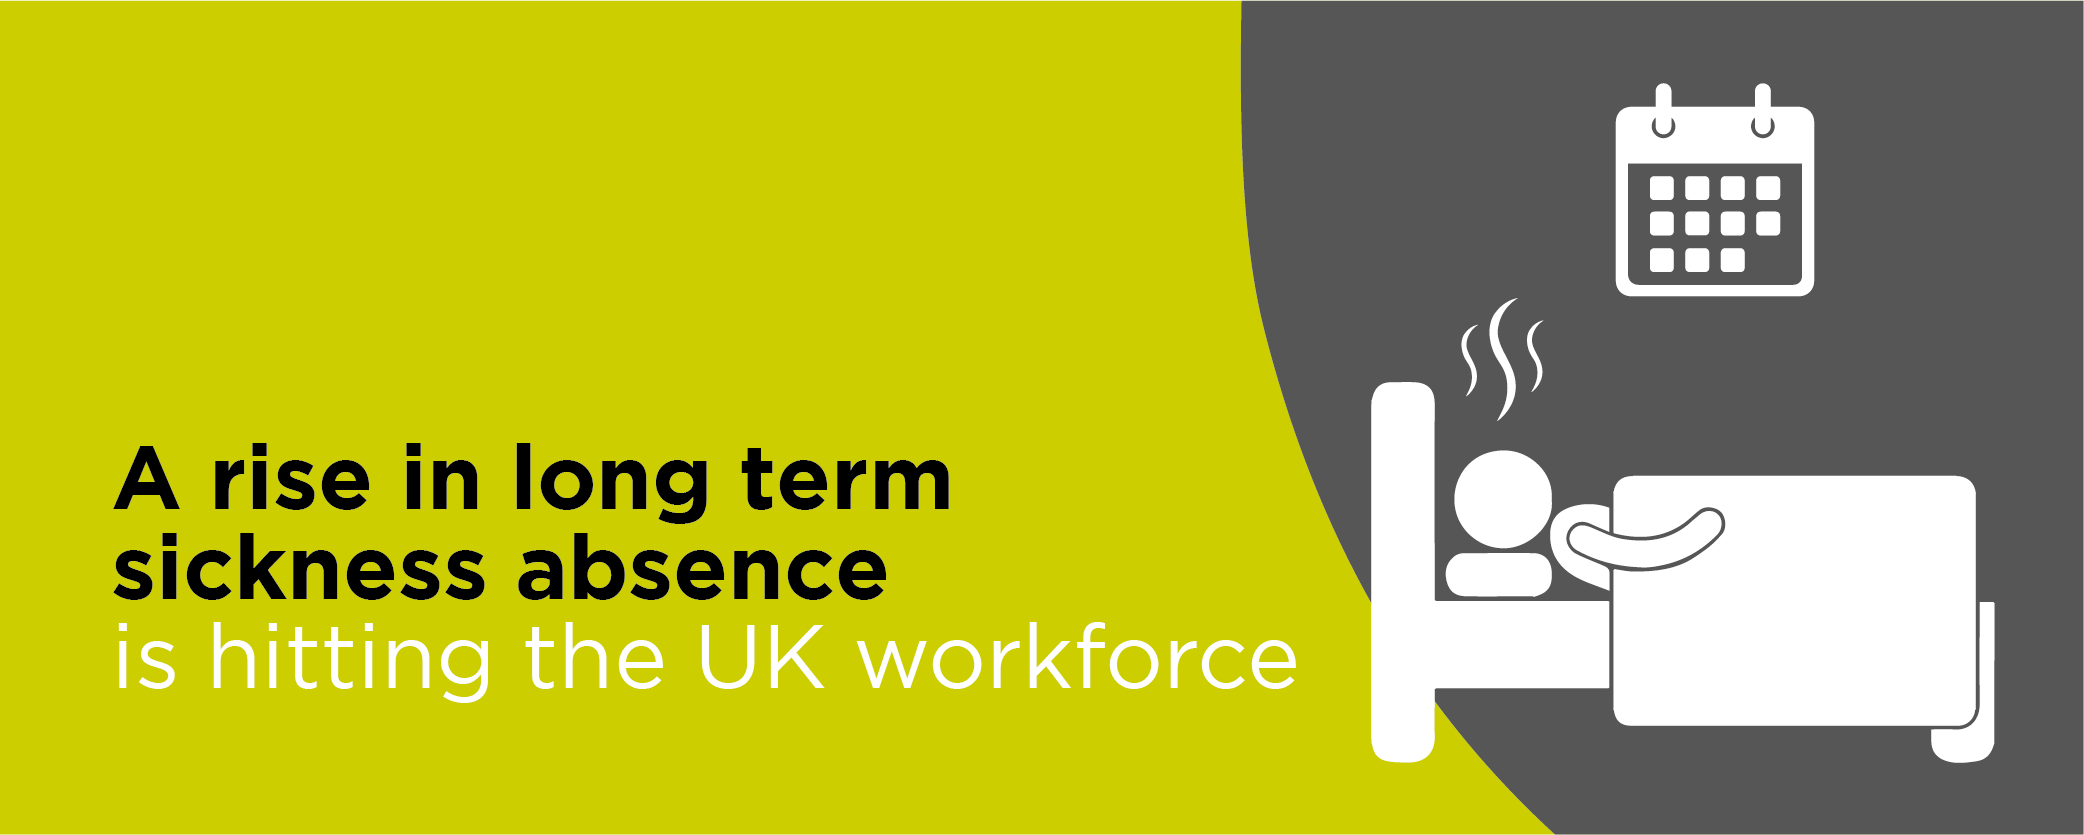 A rise in long-term sickness absence is hitting the UK workforce